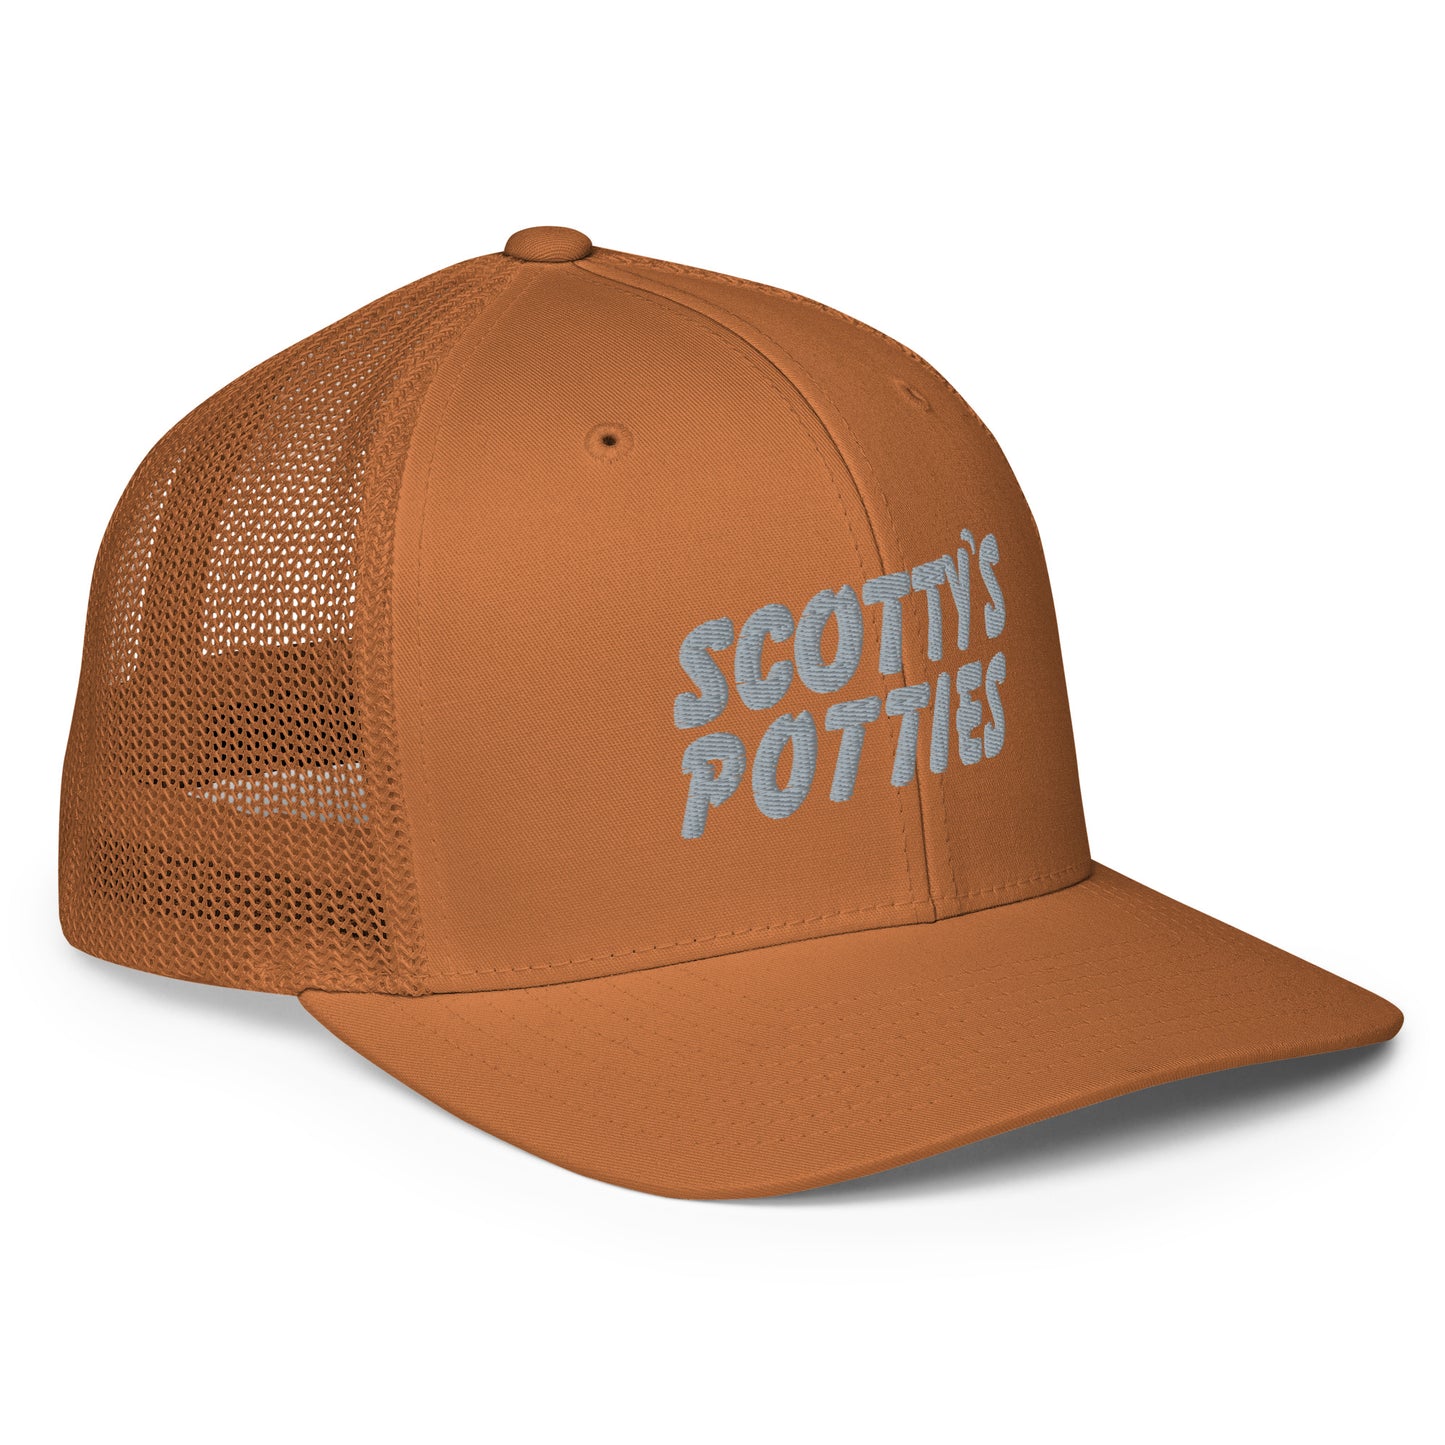 Closed-back trucker cap (ONE SIZE)